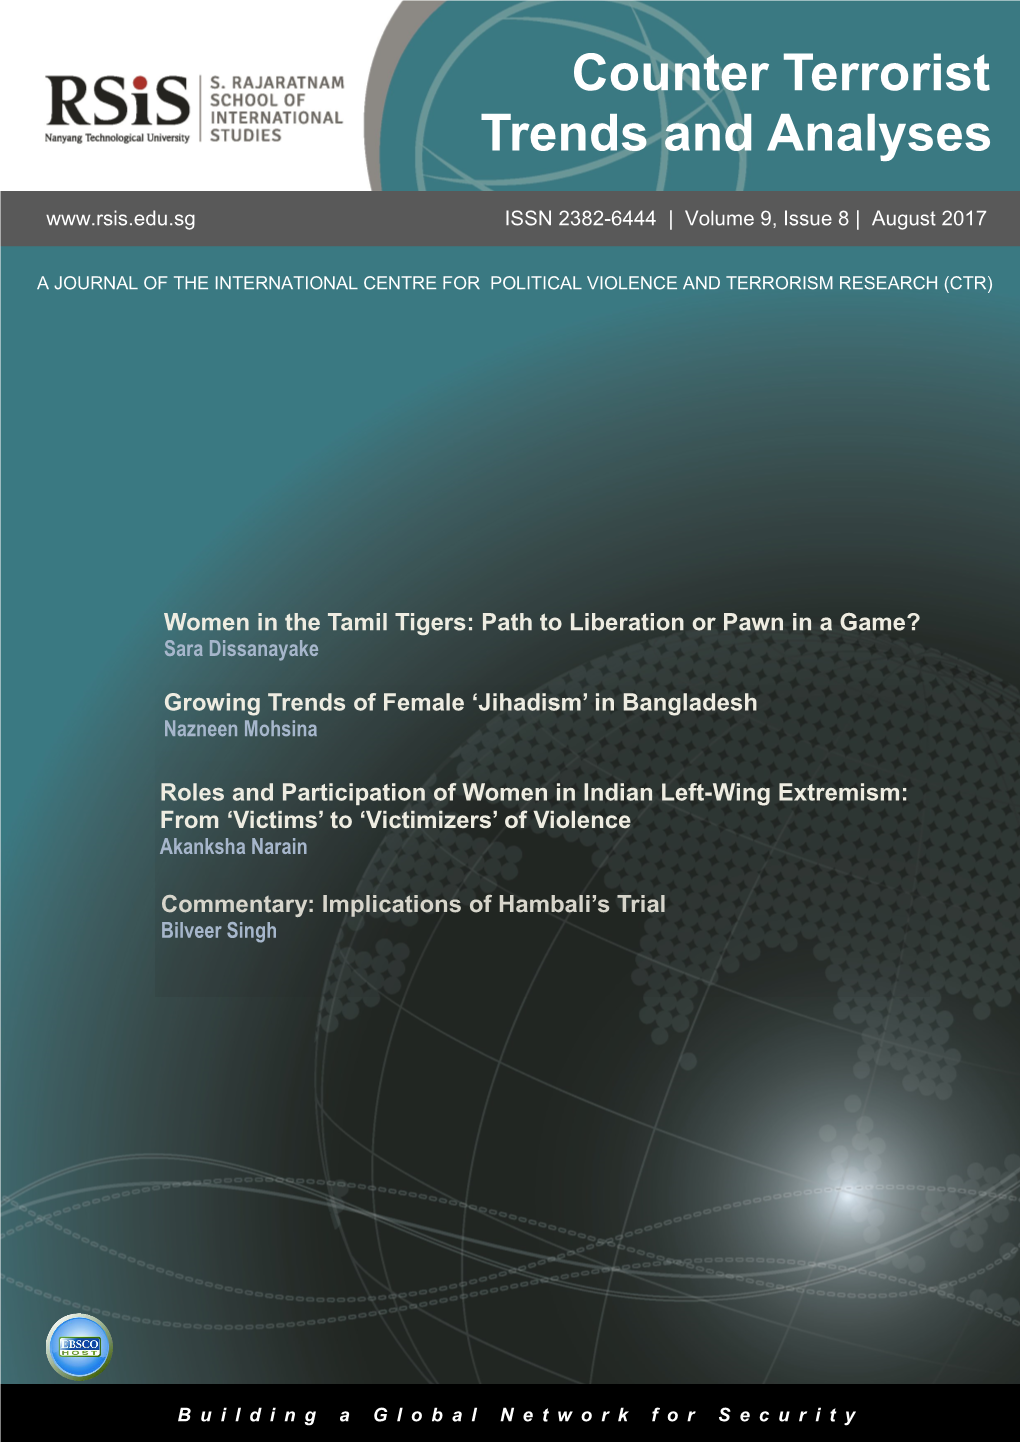 Counter Terrorist Trends and Analyses ISSN 2382-6444 | Volume 9, Issue 8 | August 2017